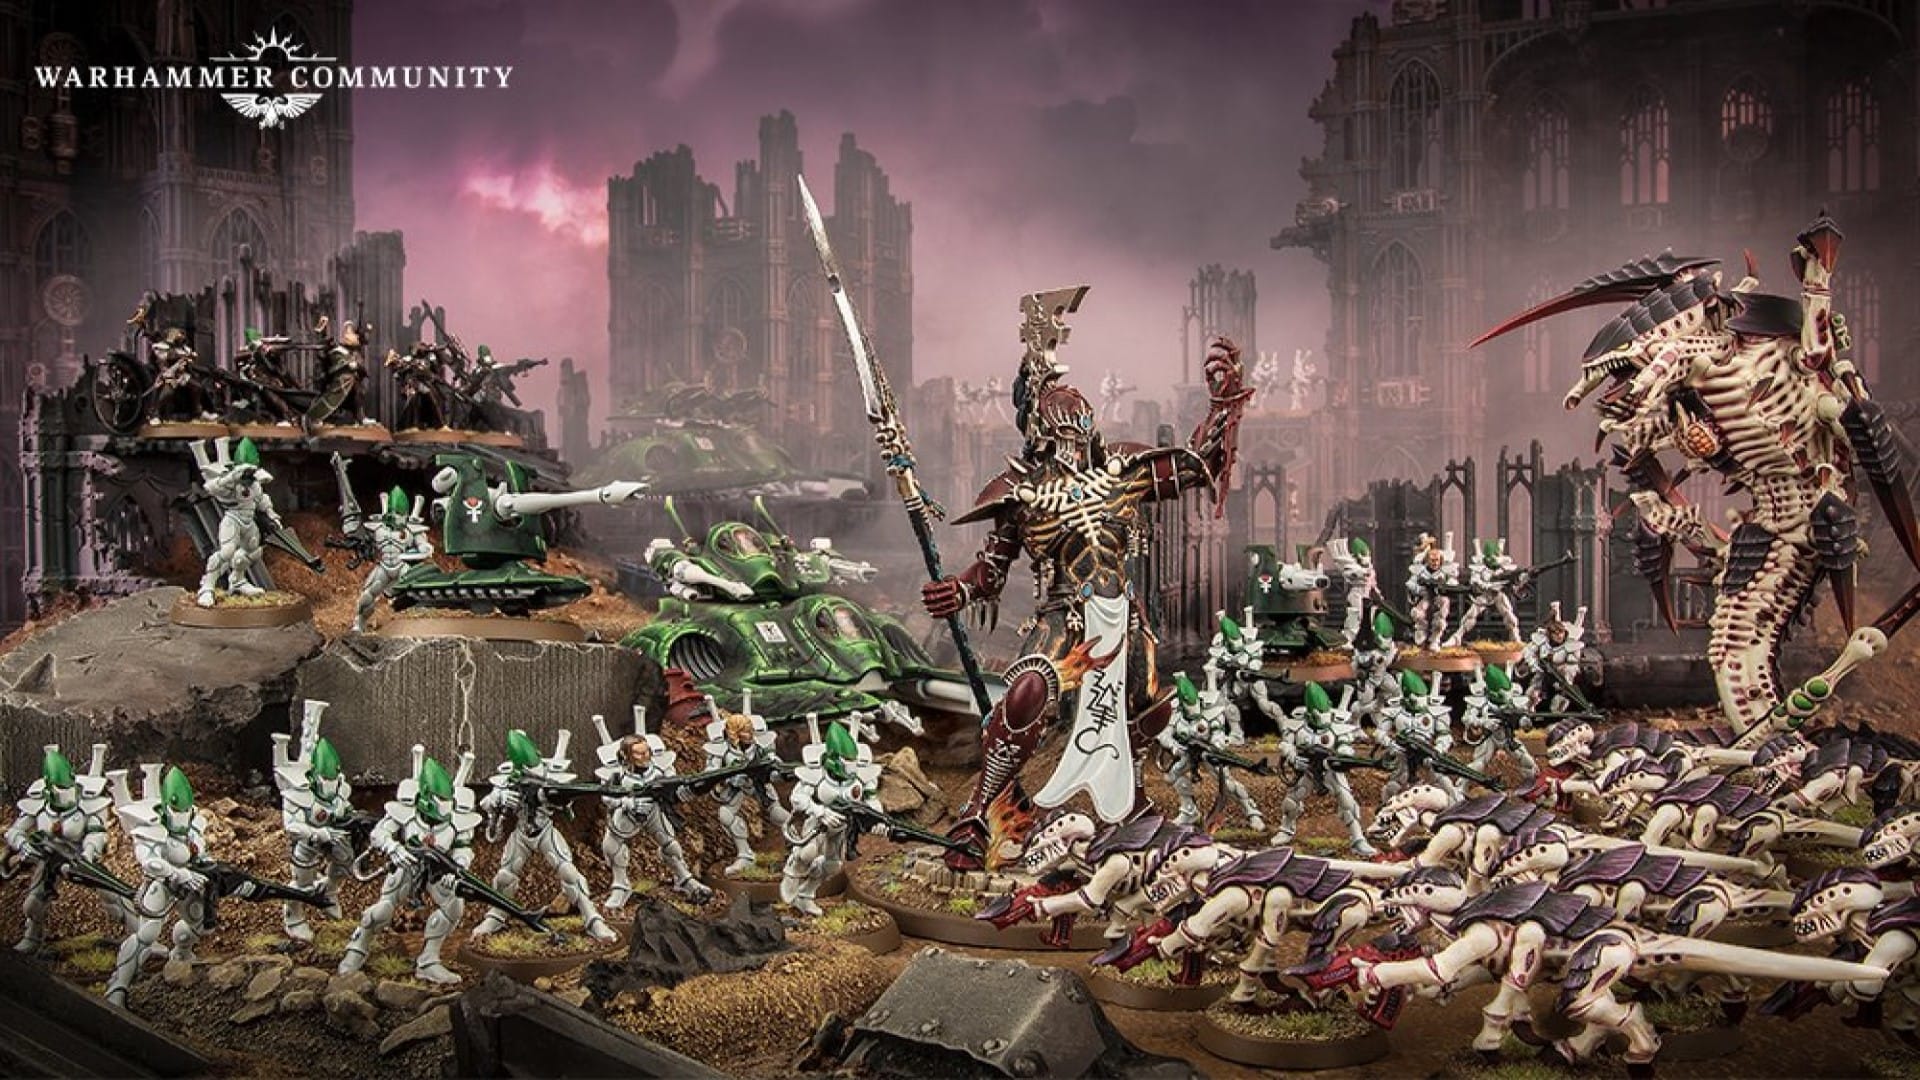 An army of Aeldari miniatures confronting an army of Tyranids